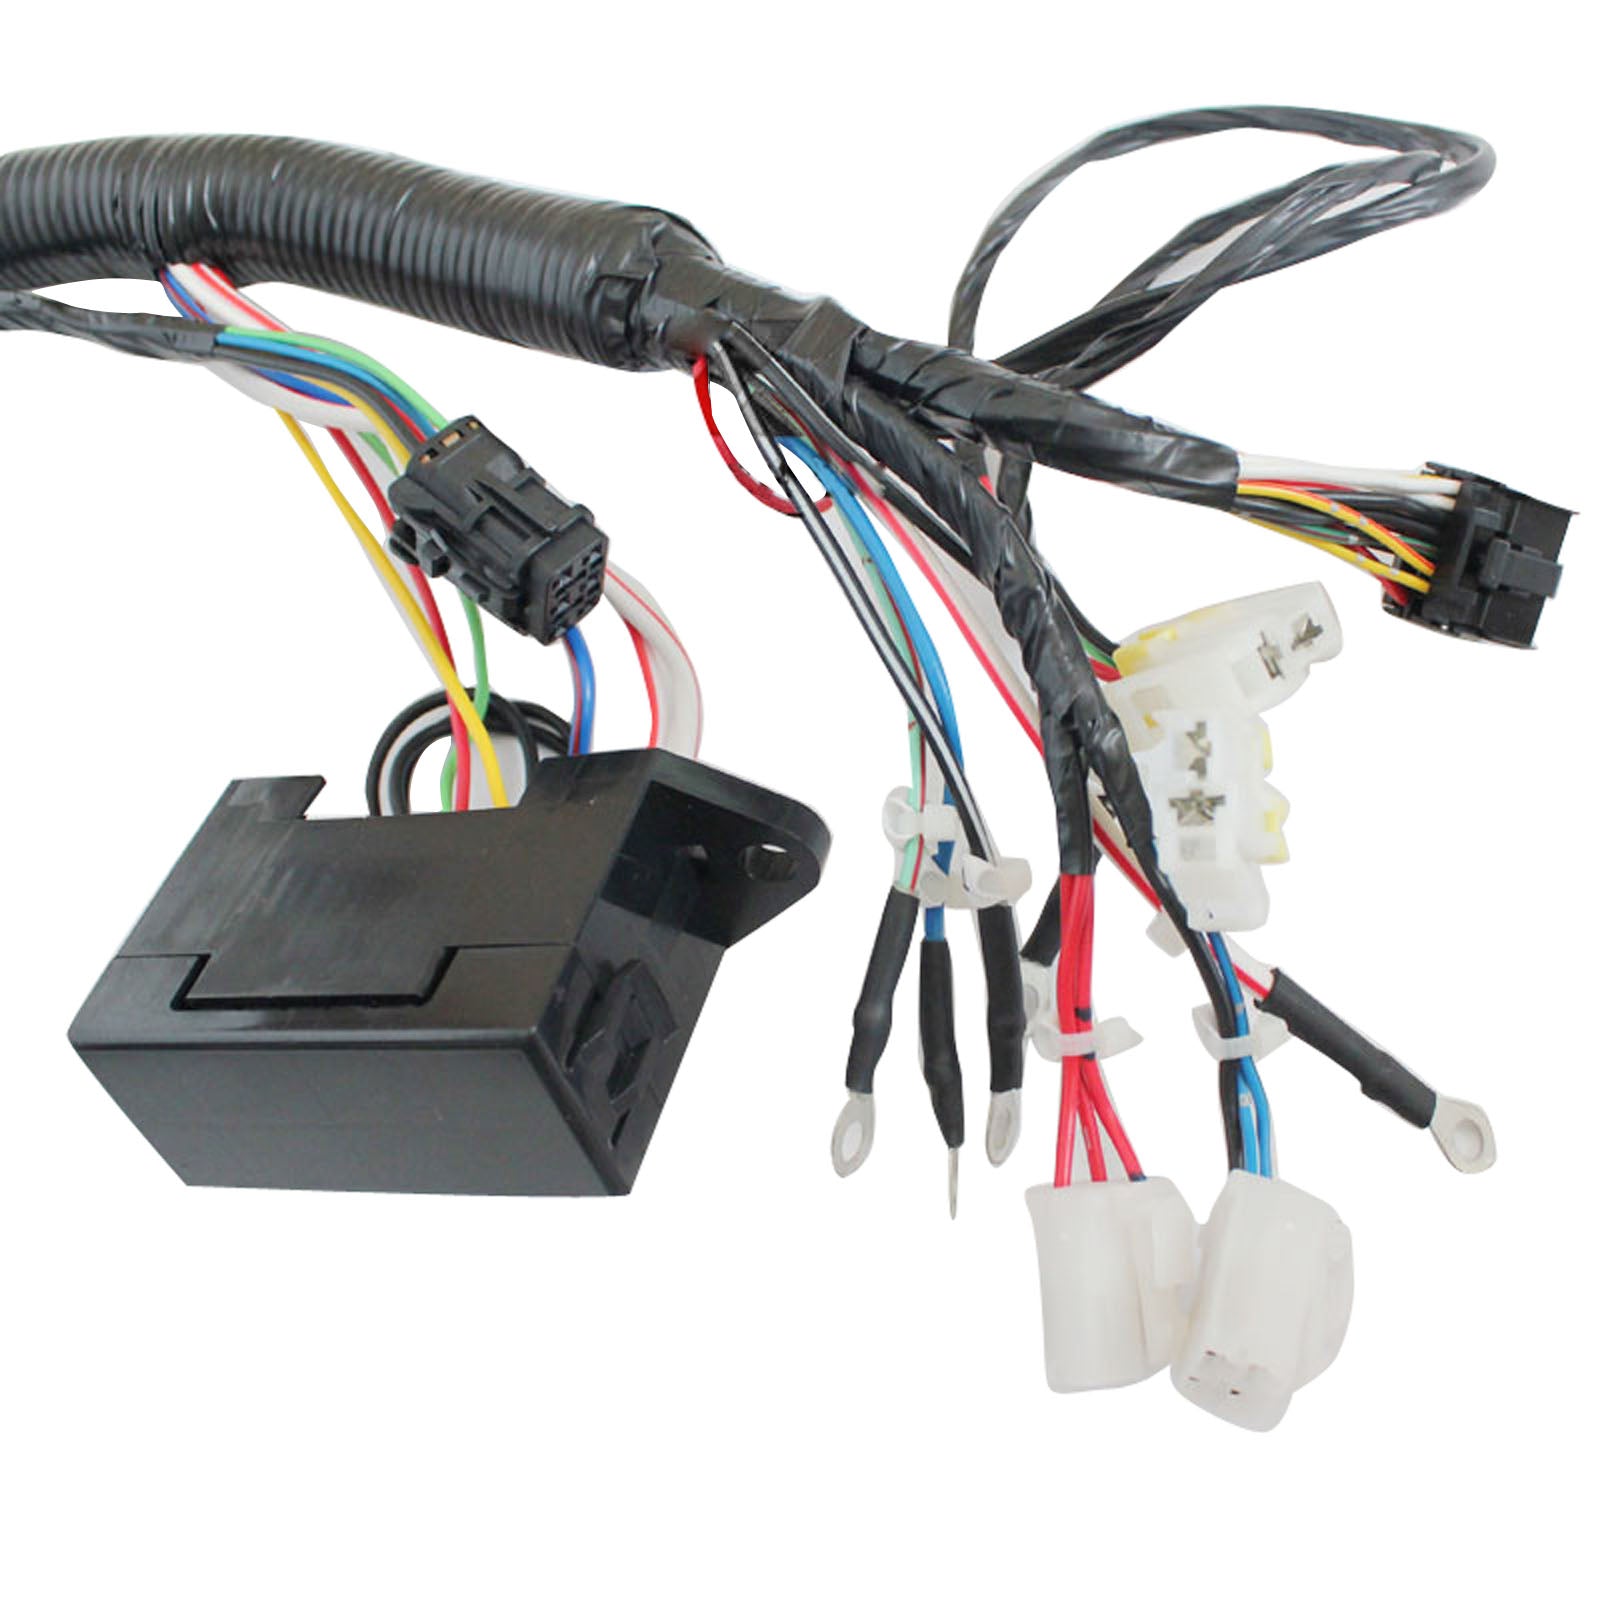 201-06-73113 Internal Wiring Harness for Excavator PC60-7 PC70-7